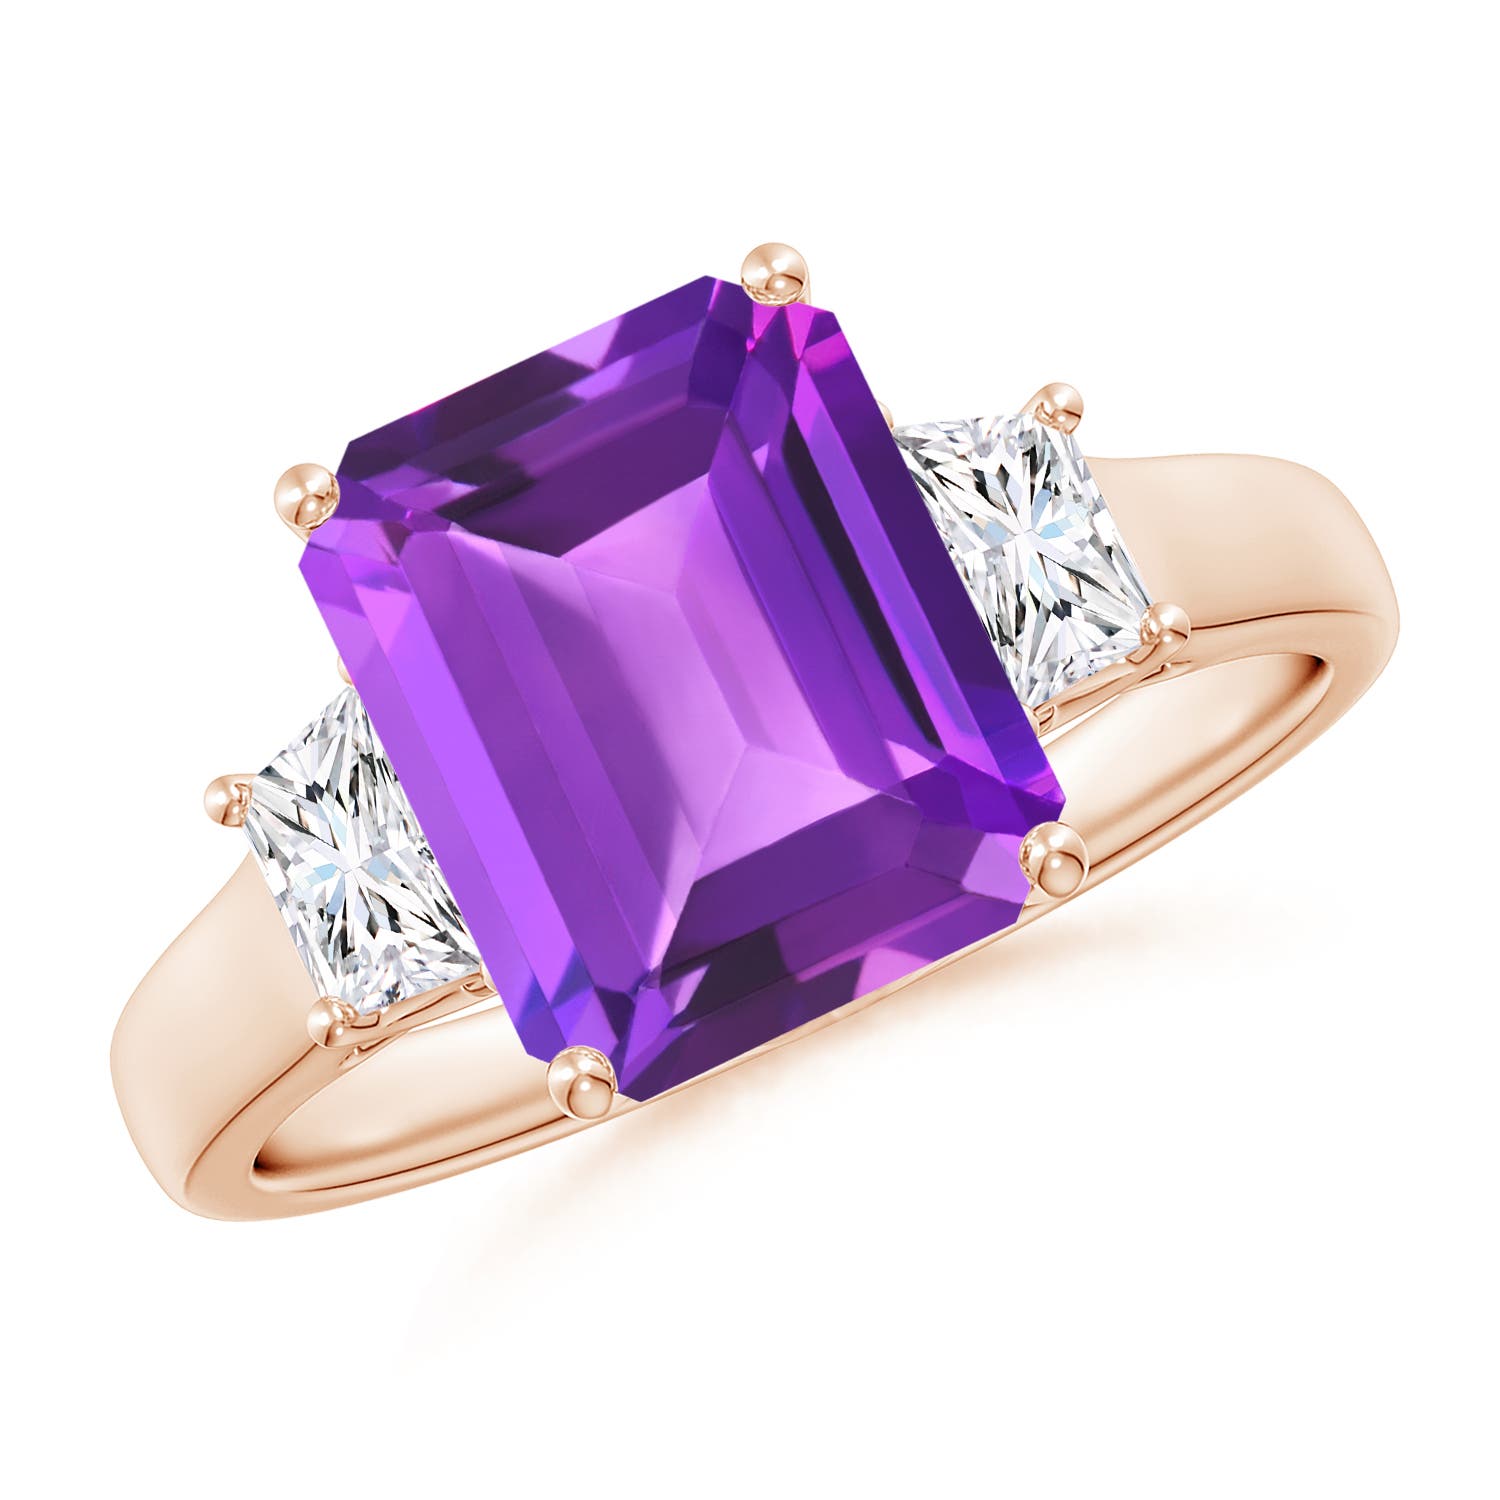 AAA- Amethyst / 3.22 CT / 14 KT Rose Gold